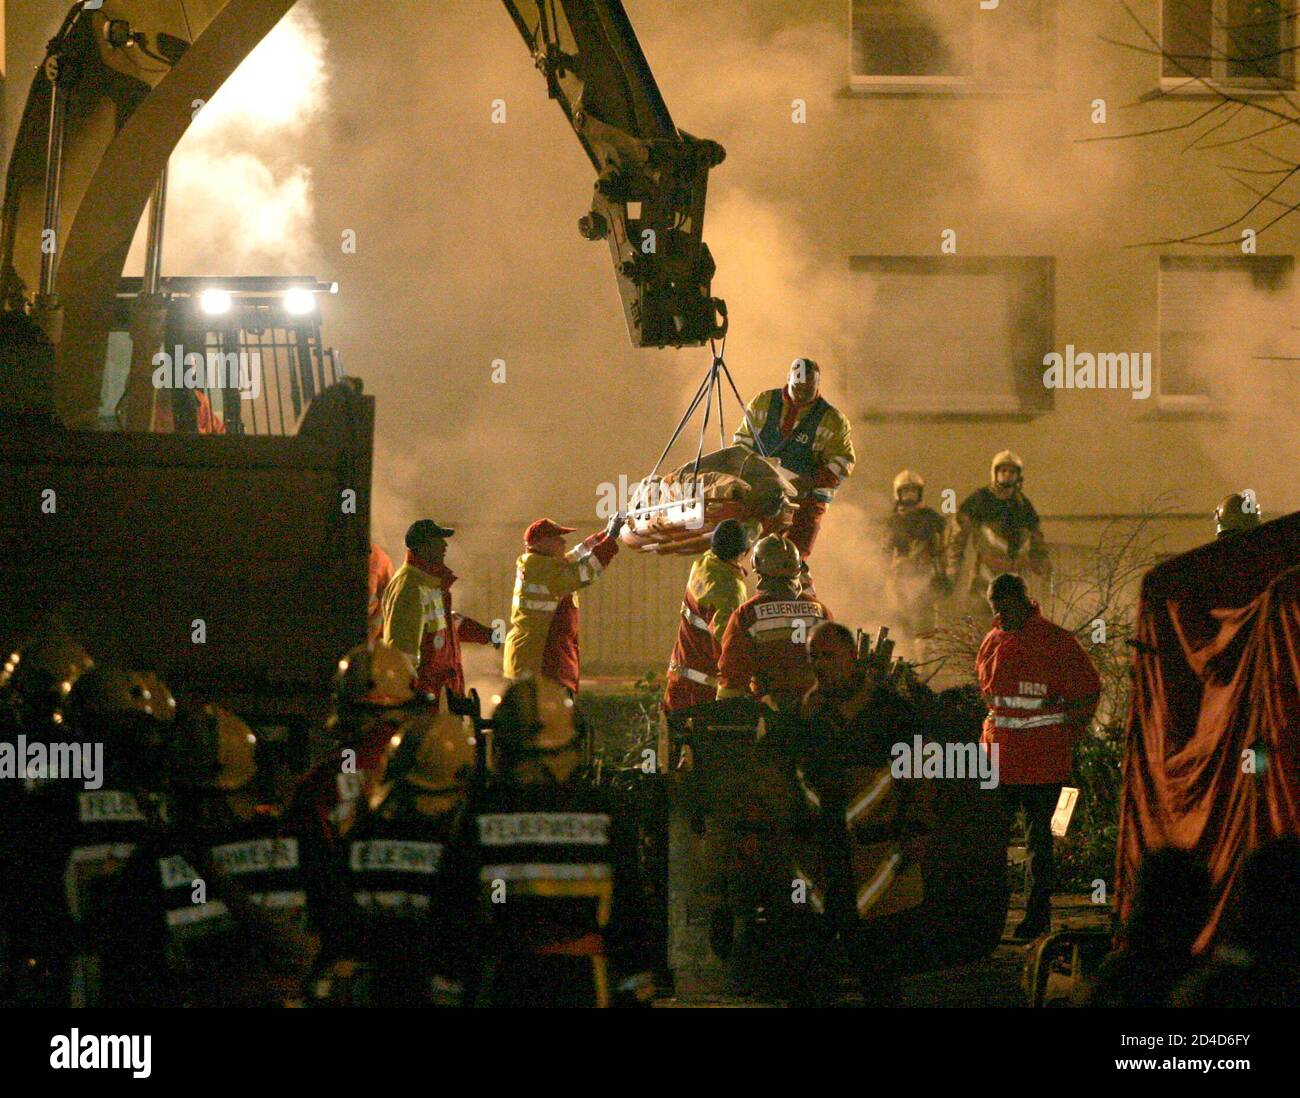 The body of a firefighter is lifted from an underground car park, the roof of which collapsed and buried up to seven firefighters underneath it in the town of Gretzenbach between the cities of Basel and Zurich November 27, 2004. Seven Swiss fire-fighters were presumed dead on Saturday after they were trapped under the collapsed roof of a burning underground car park."Of the seven persons, five have been located and show no signs of life, so we expect that they are dead," chief fire inspector Paul Haus said. All seven were thought to have suffocated. REUTERS/Ruben Sprich  RS/ABP Stock Photo